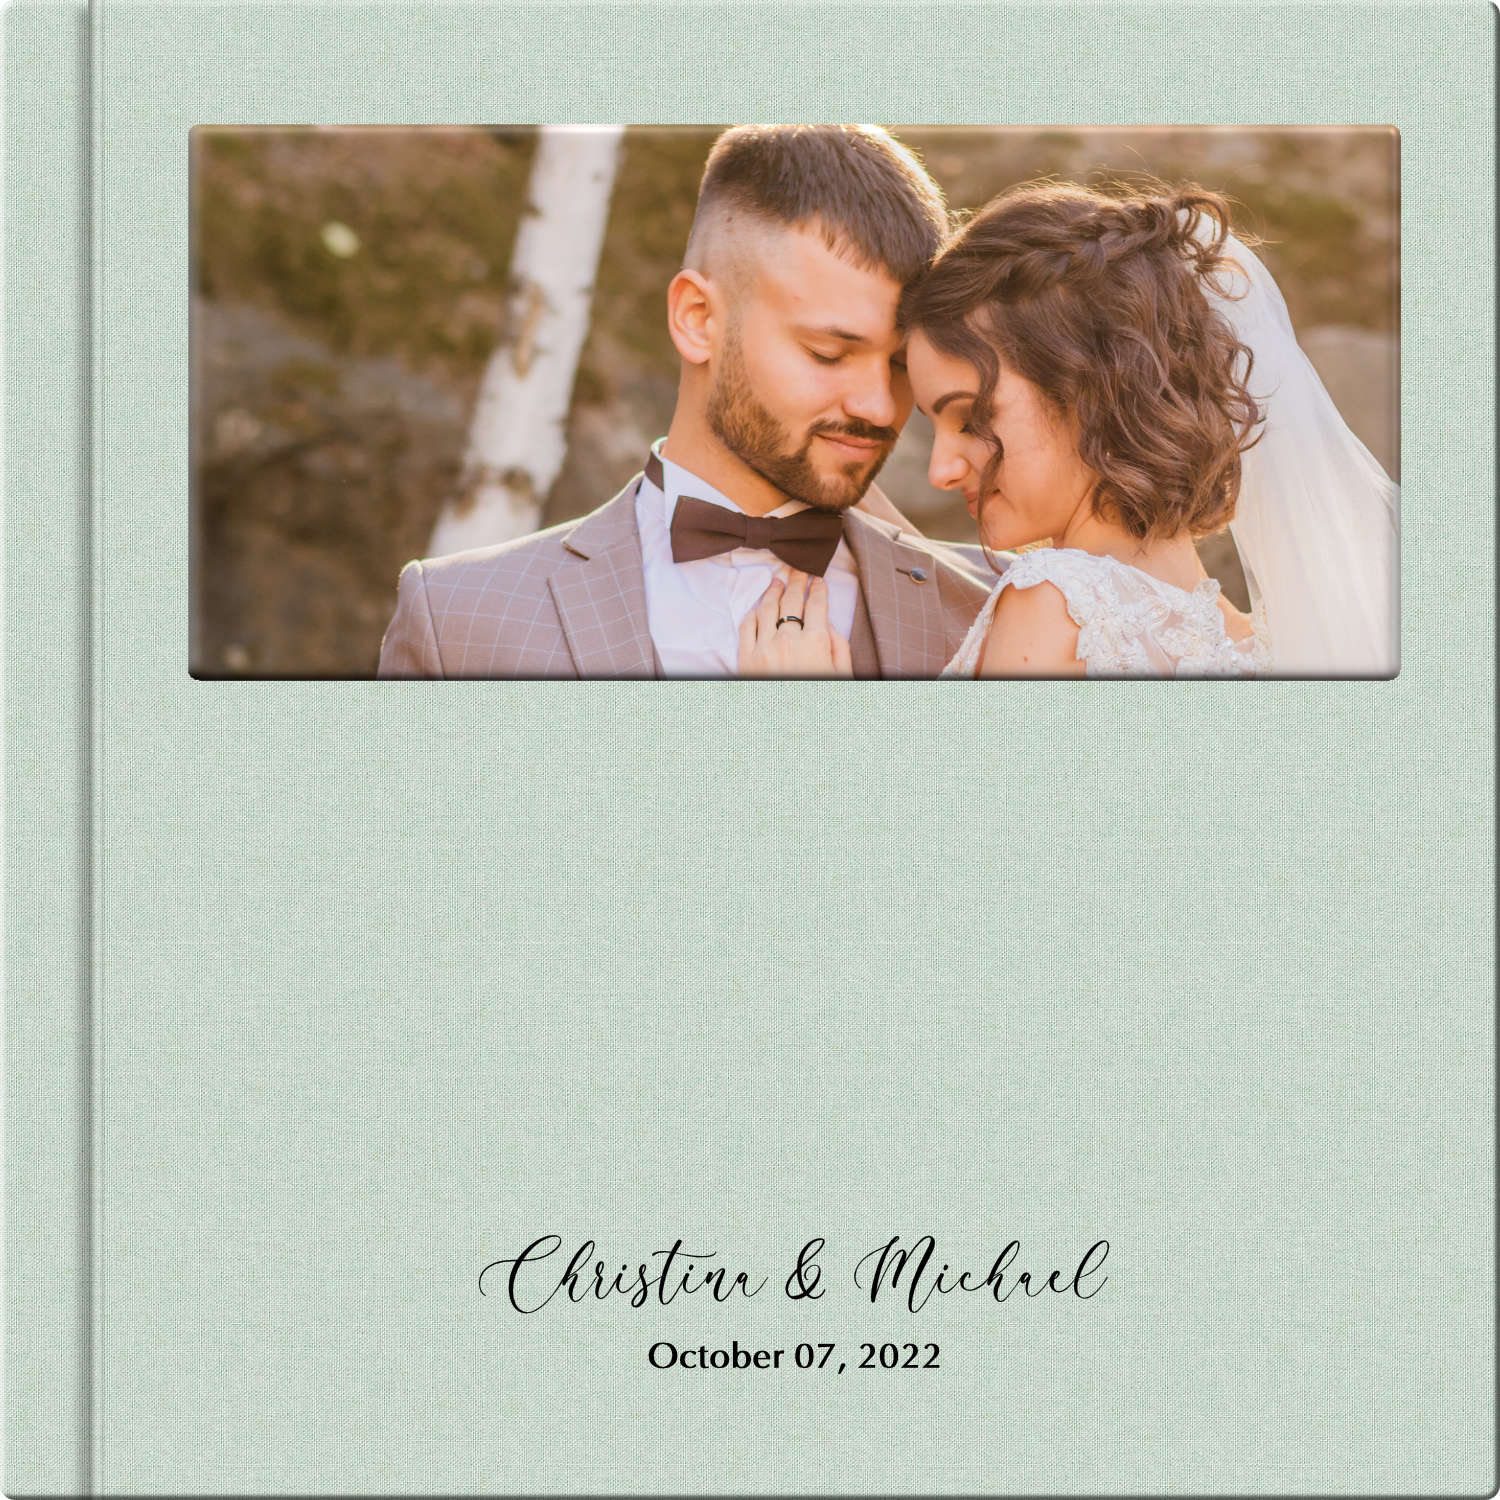 Custom wedding album cover with photo indent and title